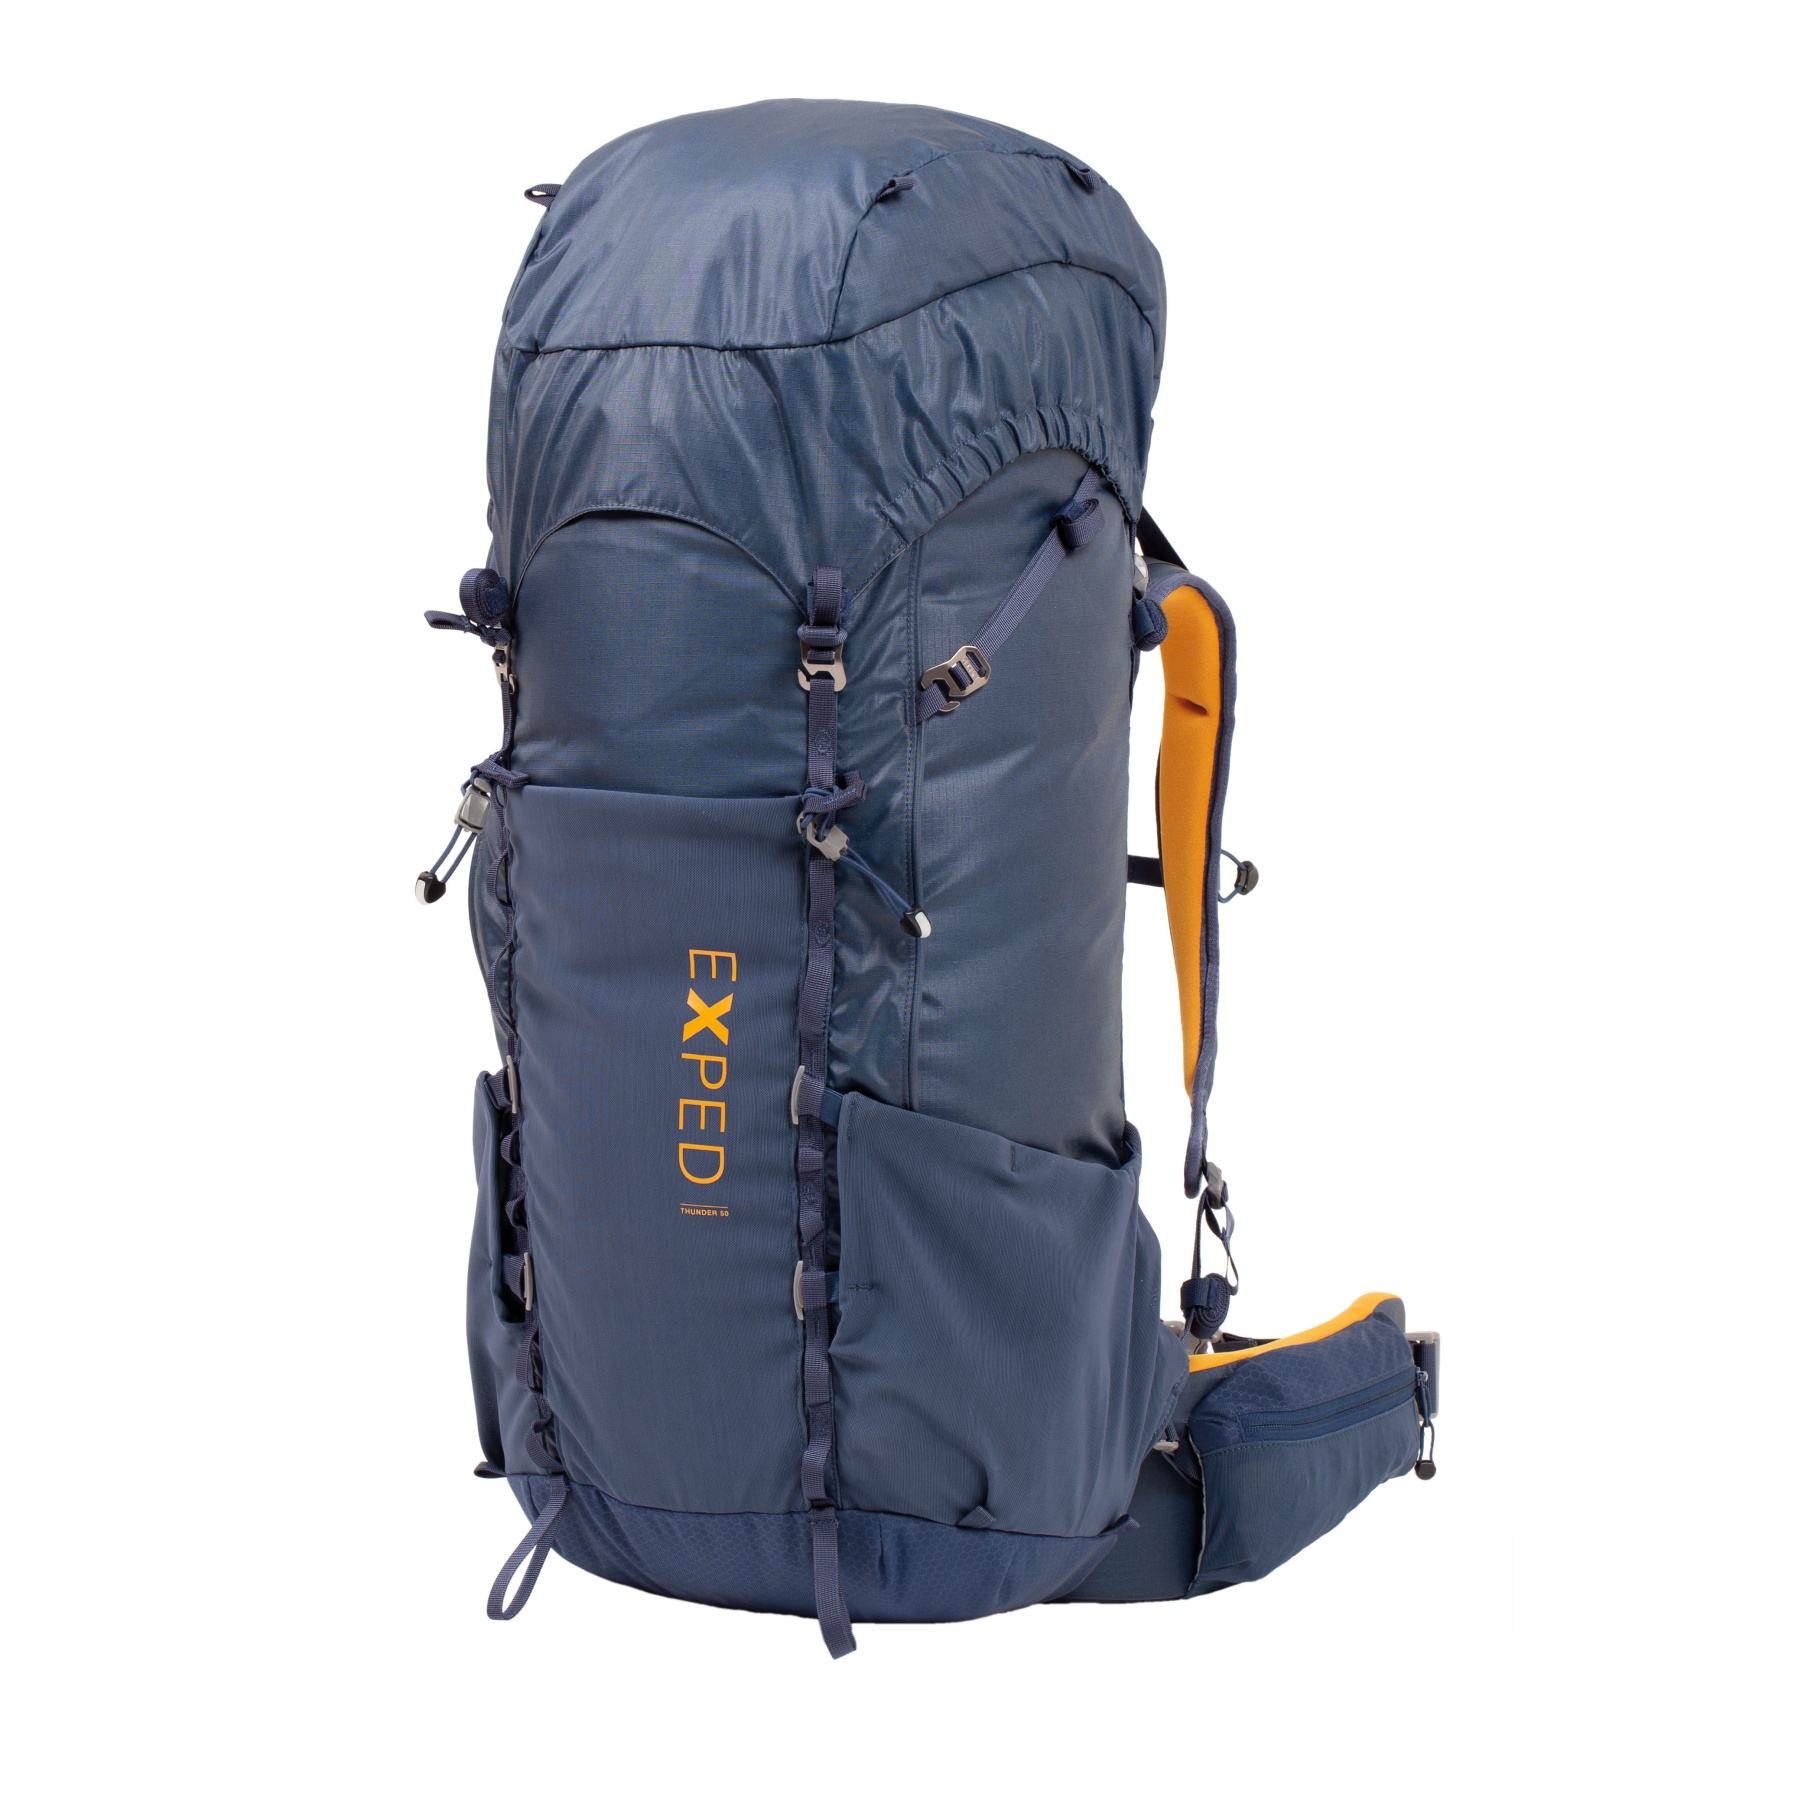 Image of Exped Thunder 50 Backpack - navy